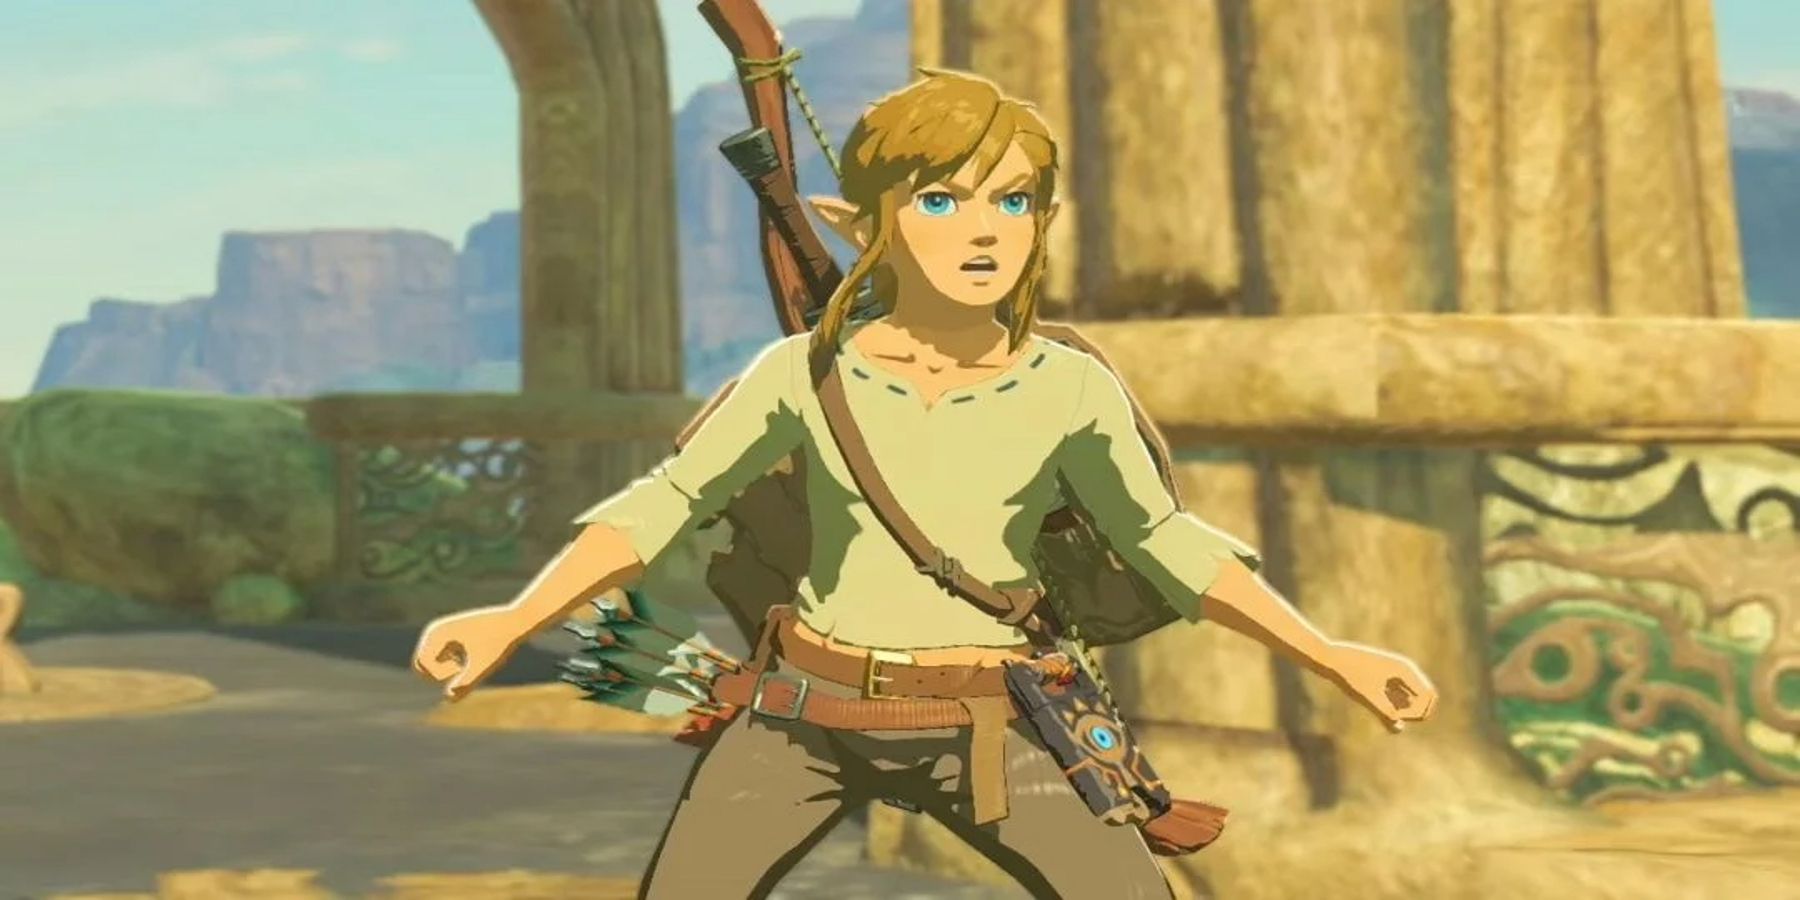 Link will be stripped back for Breath of the Wild 2